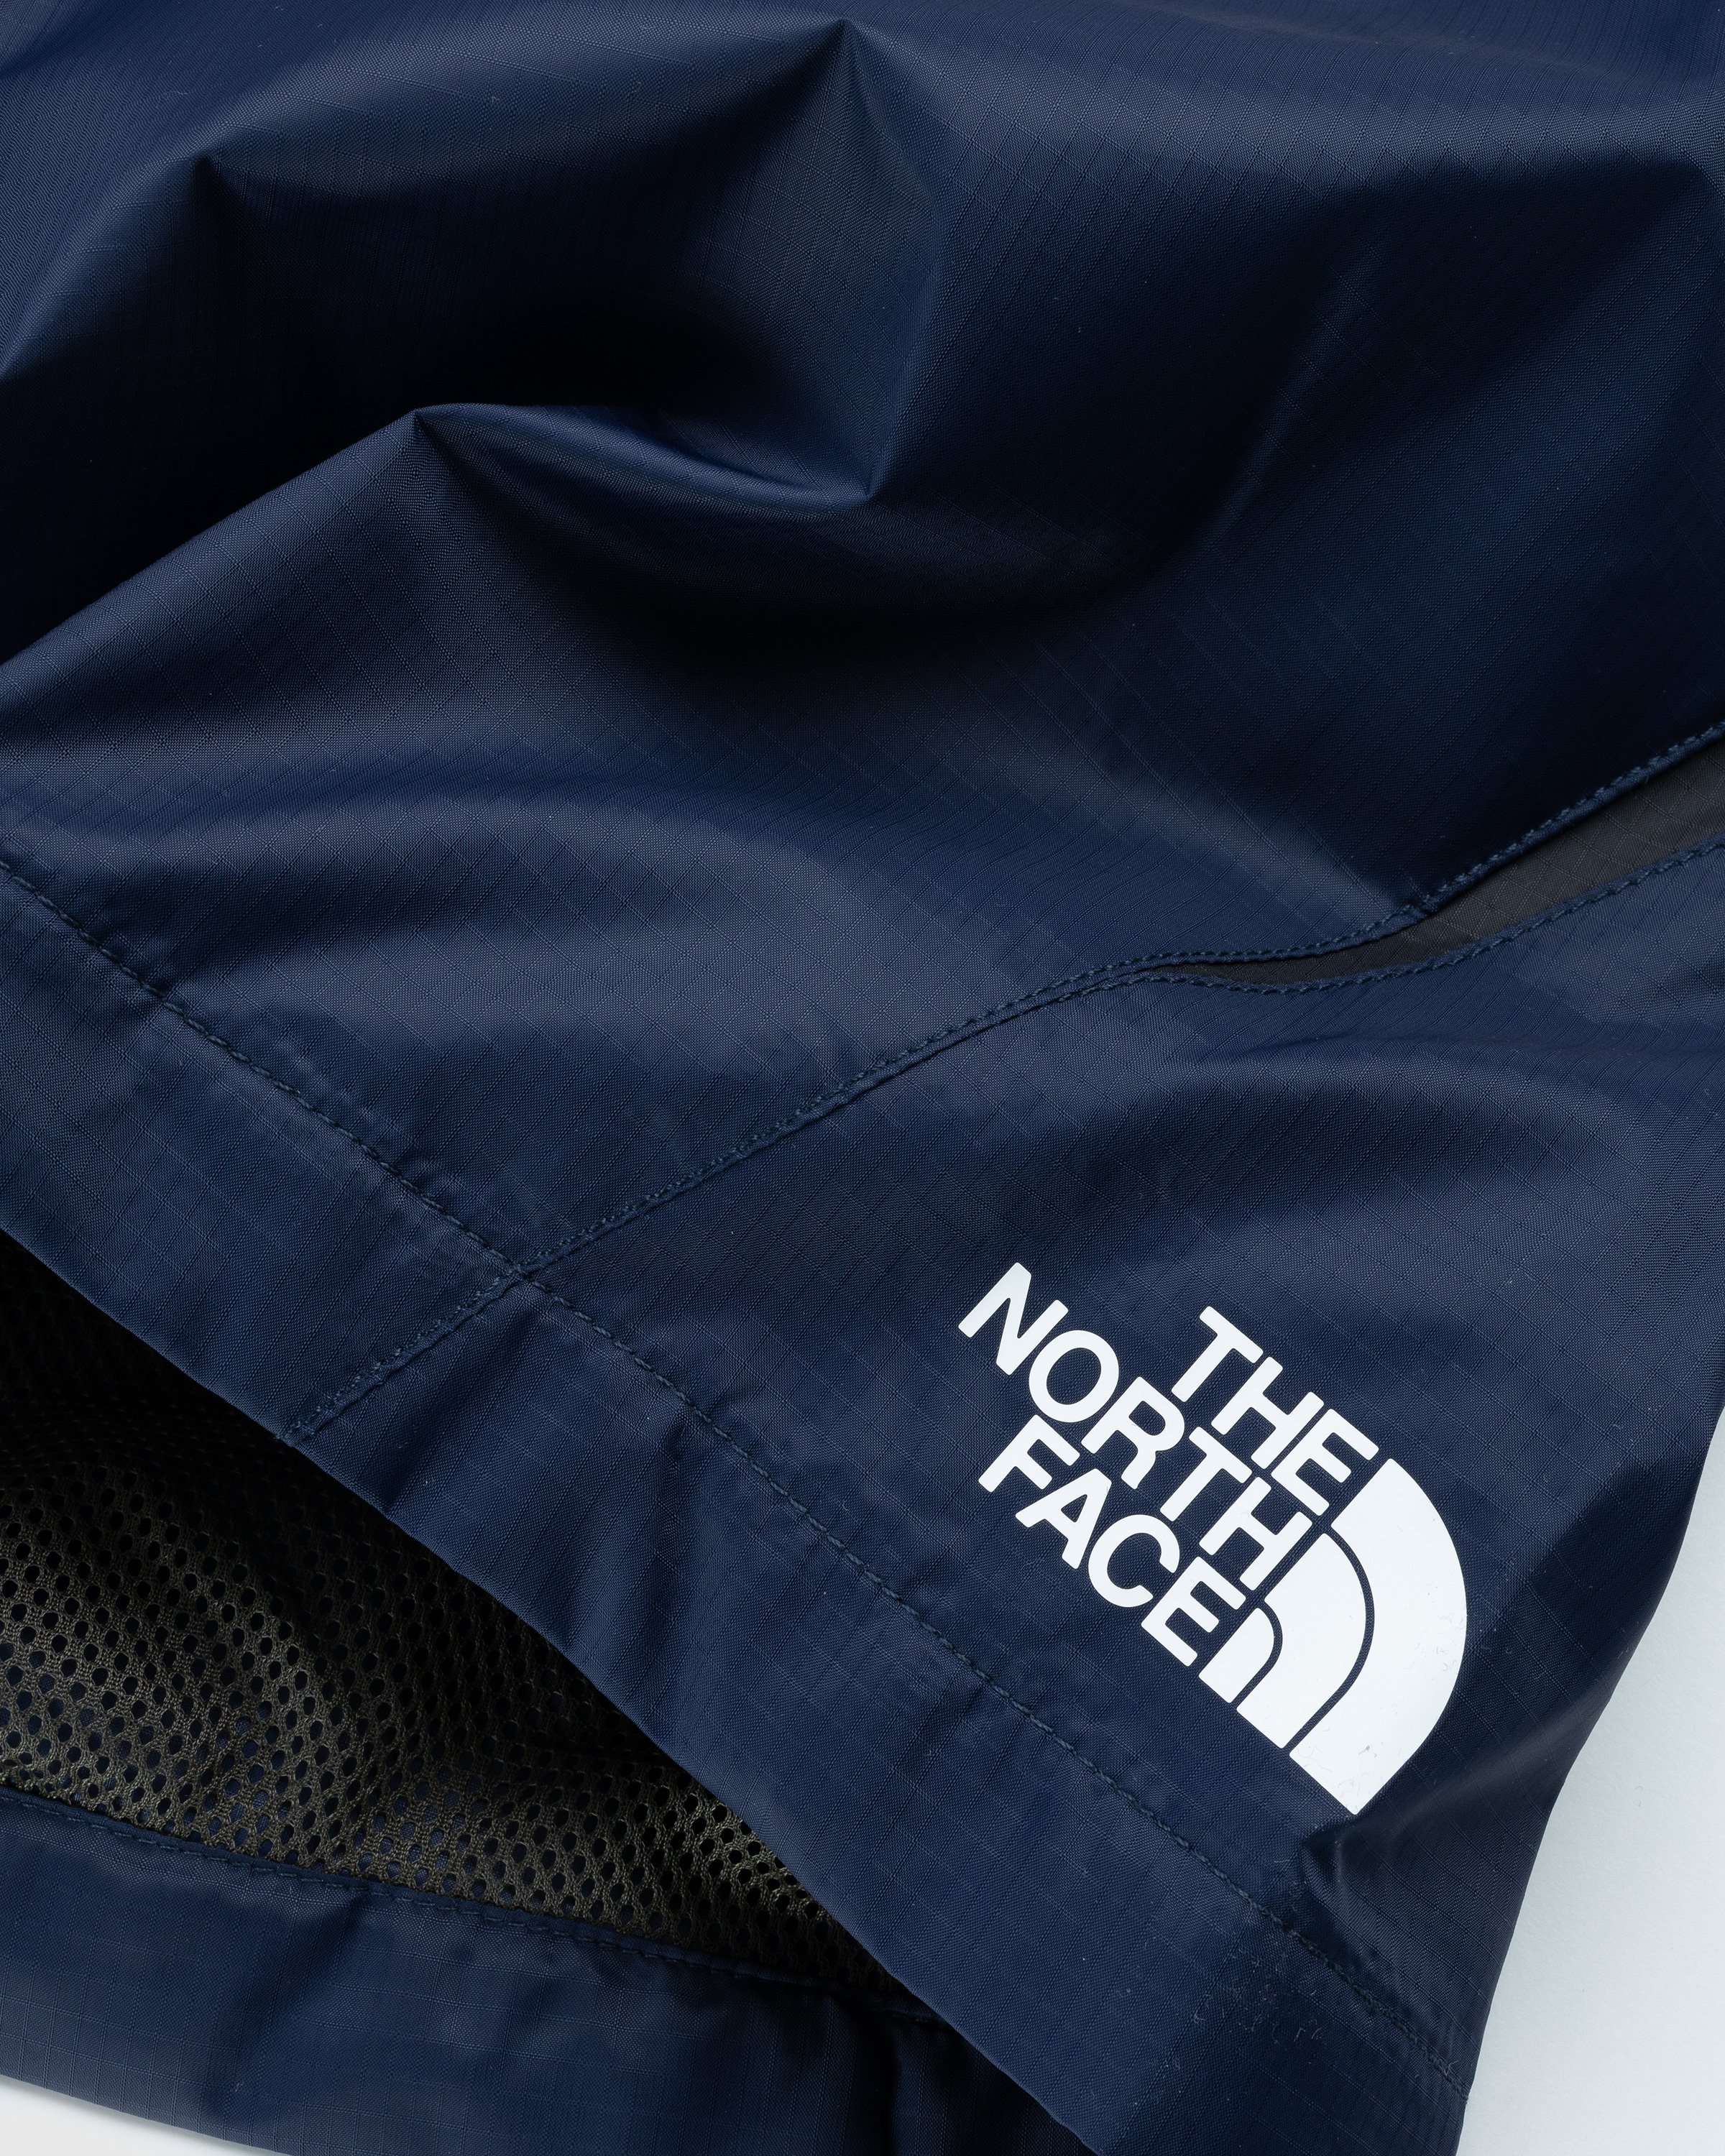 The North Face – TNF X Shorts Blue | Highsnobiety Shop